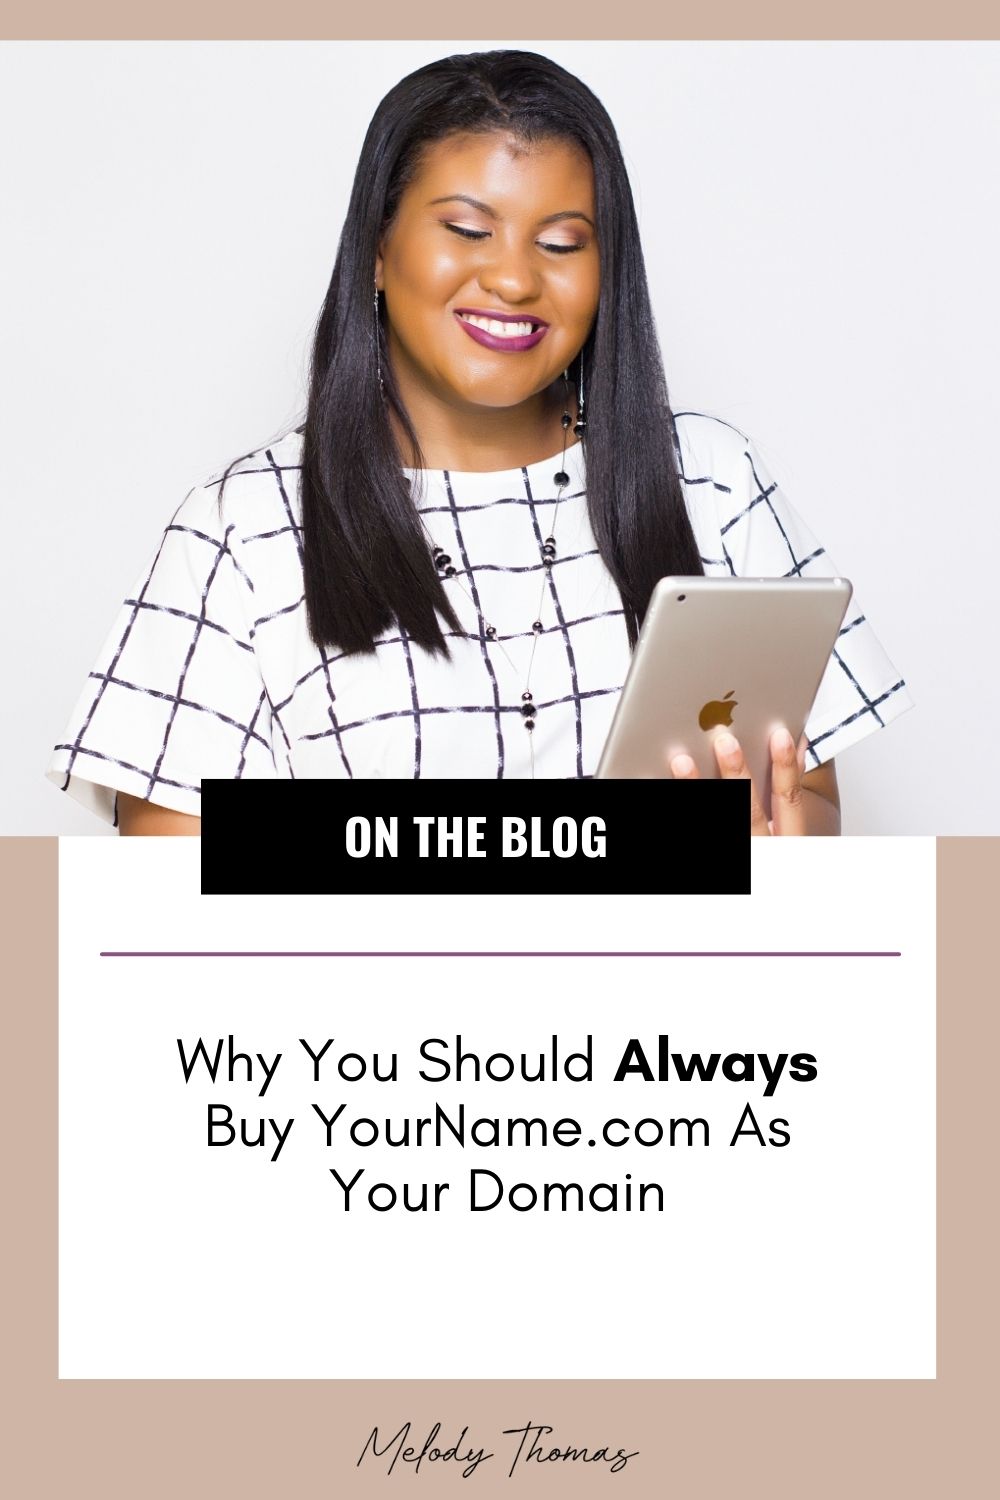 Why You Should Always Buy YourName.com As Your Domain